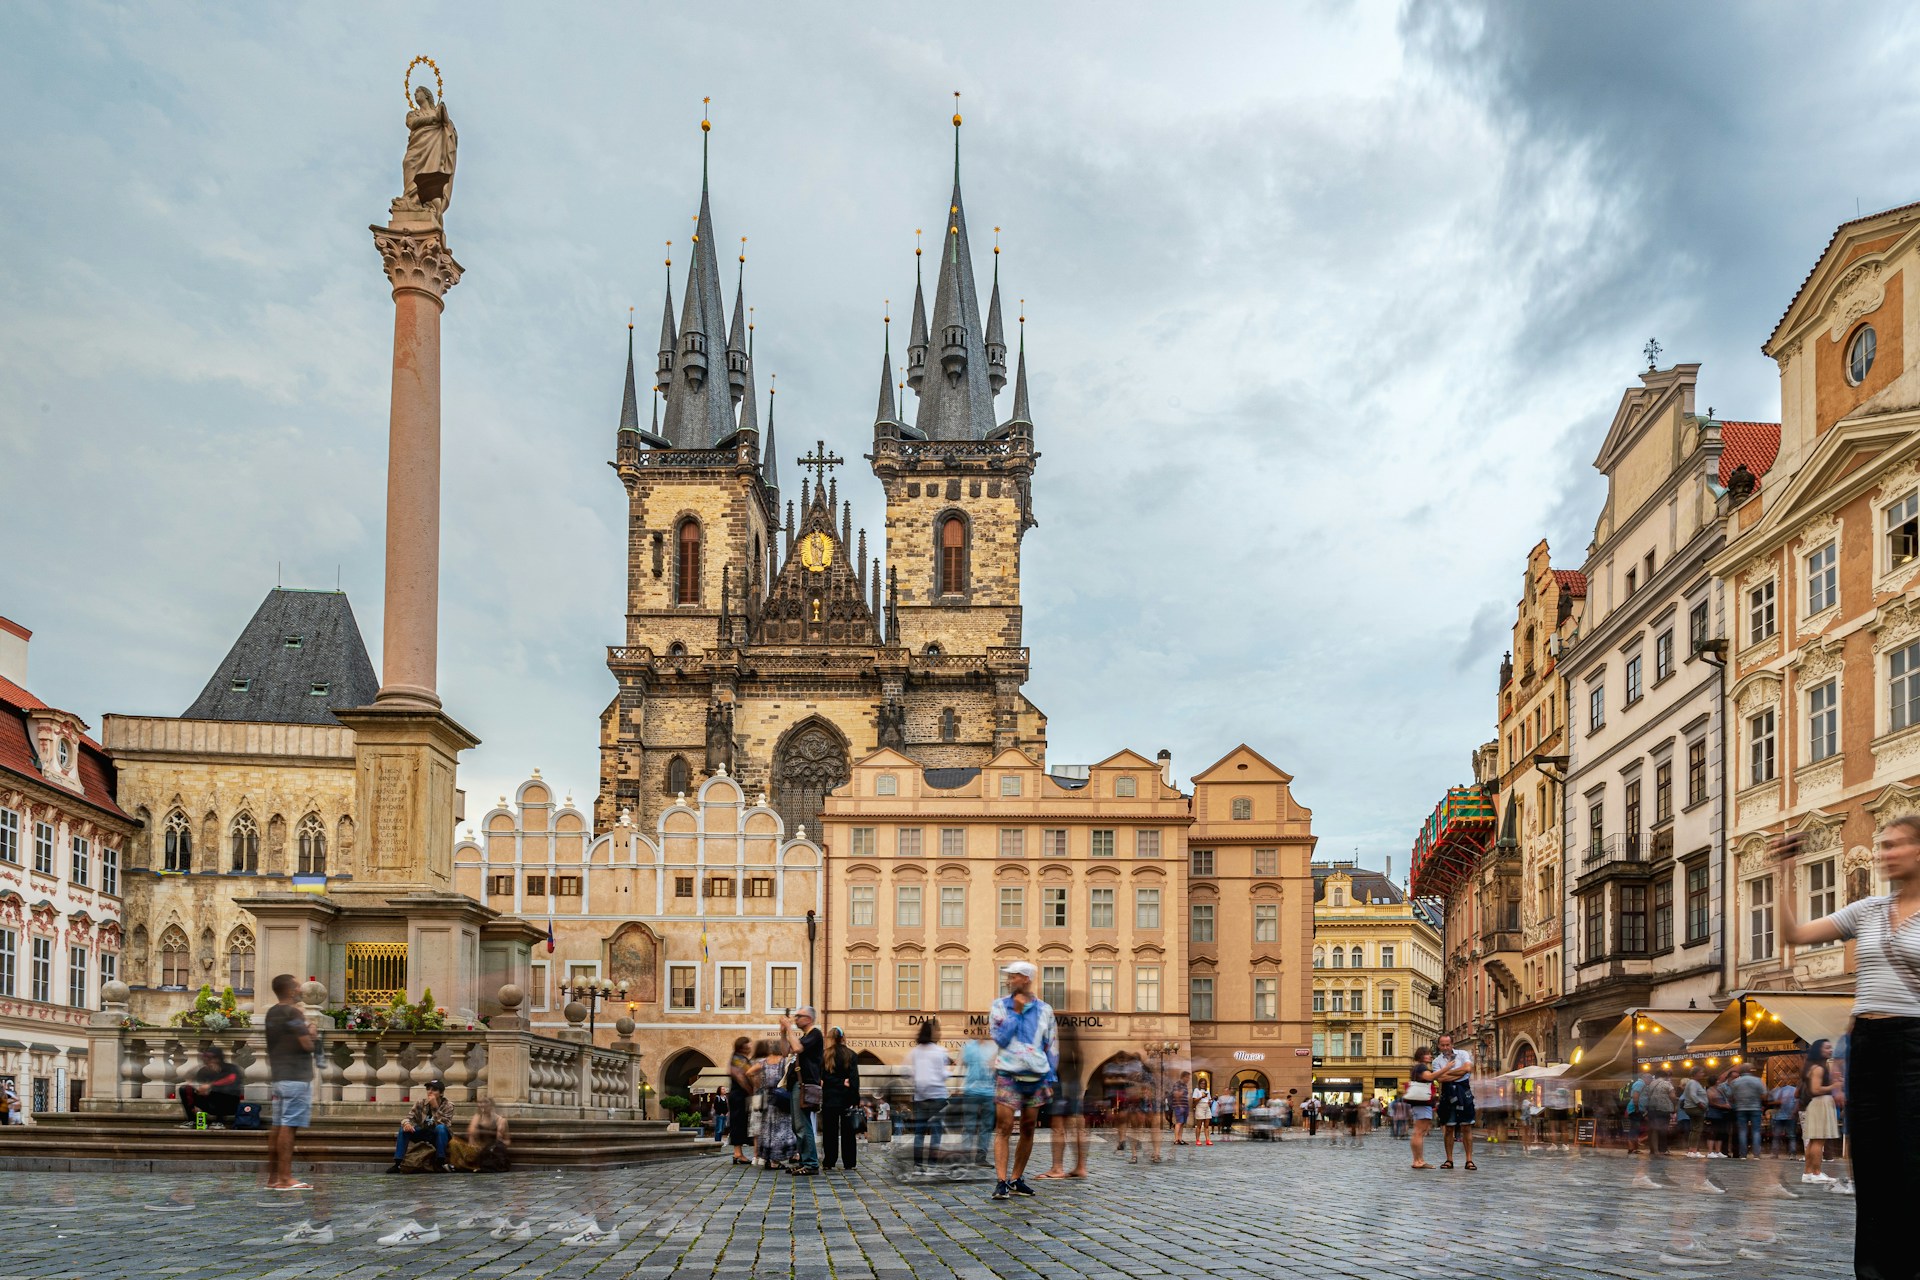 Old Town Square, Must-See Sights in Prague